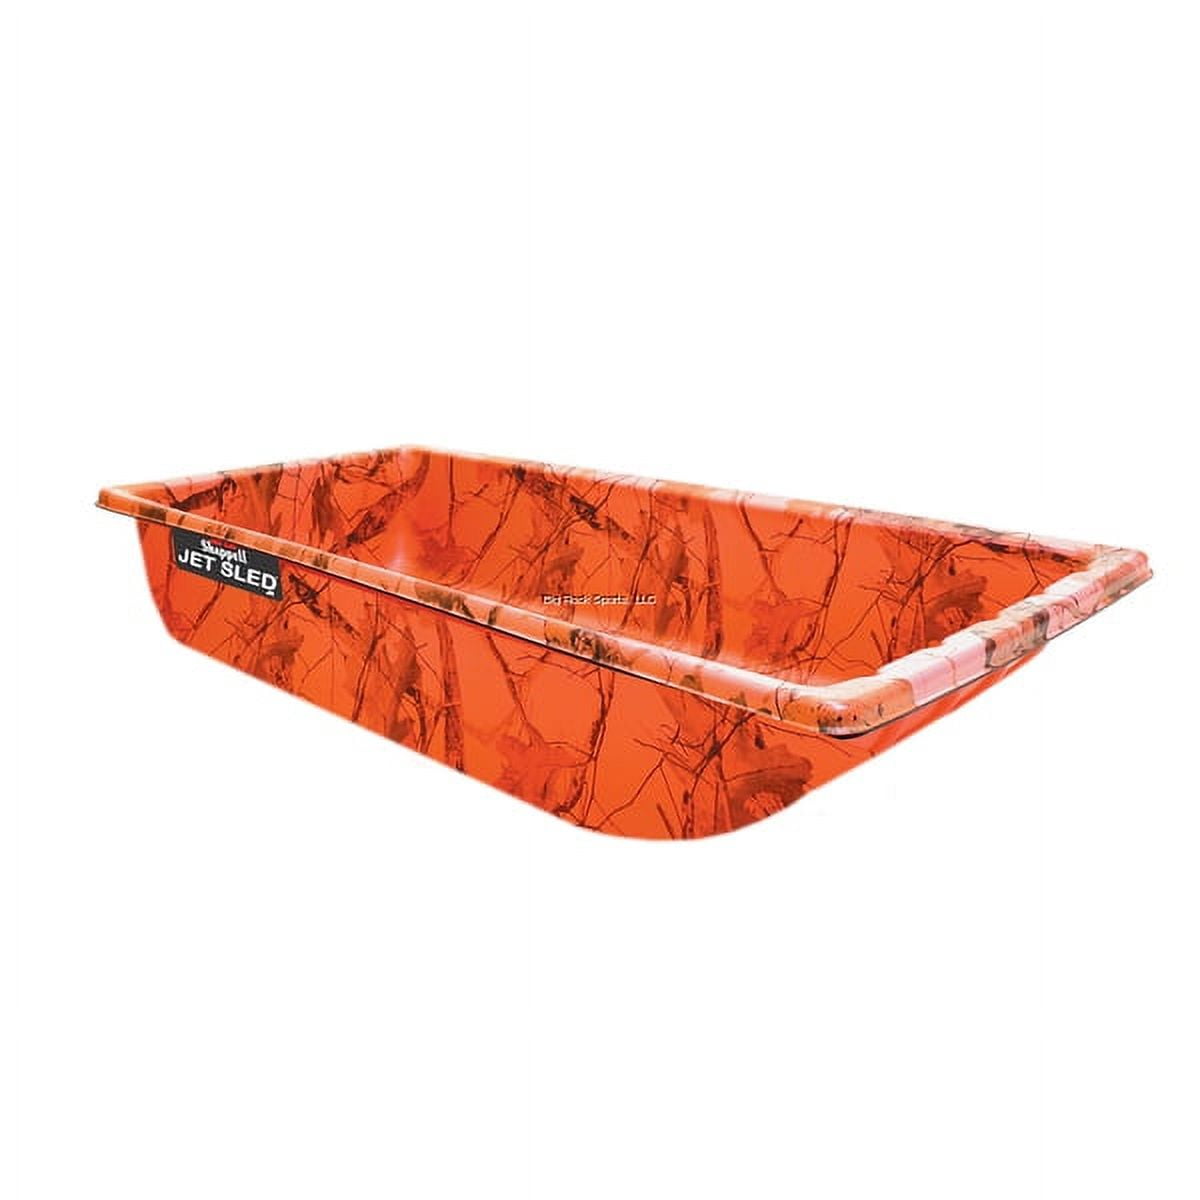 New Shappell Ice Fishing Jet Sled XL, All-Terrain Blaze Camo w/ Tow Rope